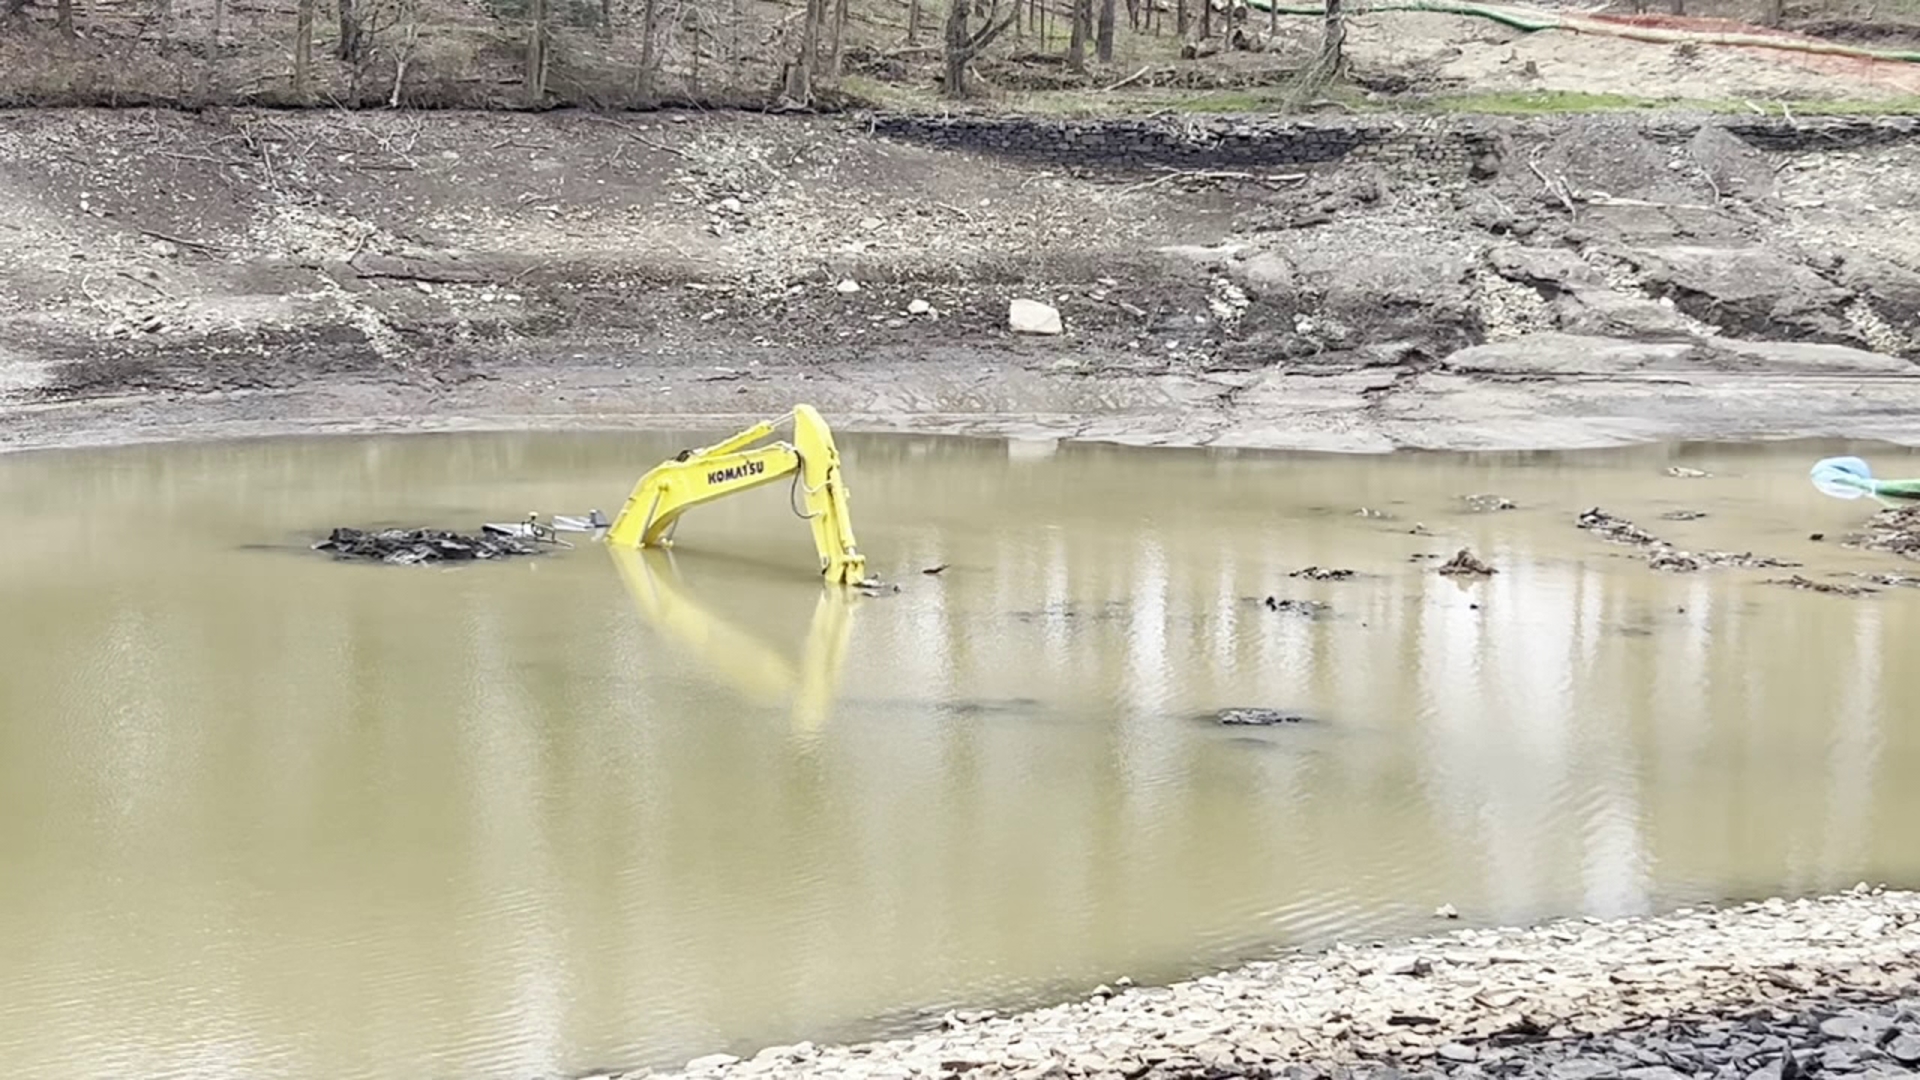 An excavator that was being used in a dam improvement project fell into Curtis Reservoir near Elmhurst Friday afternoon, according to Pennsylvania American Water.